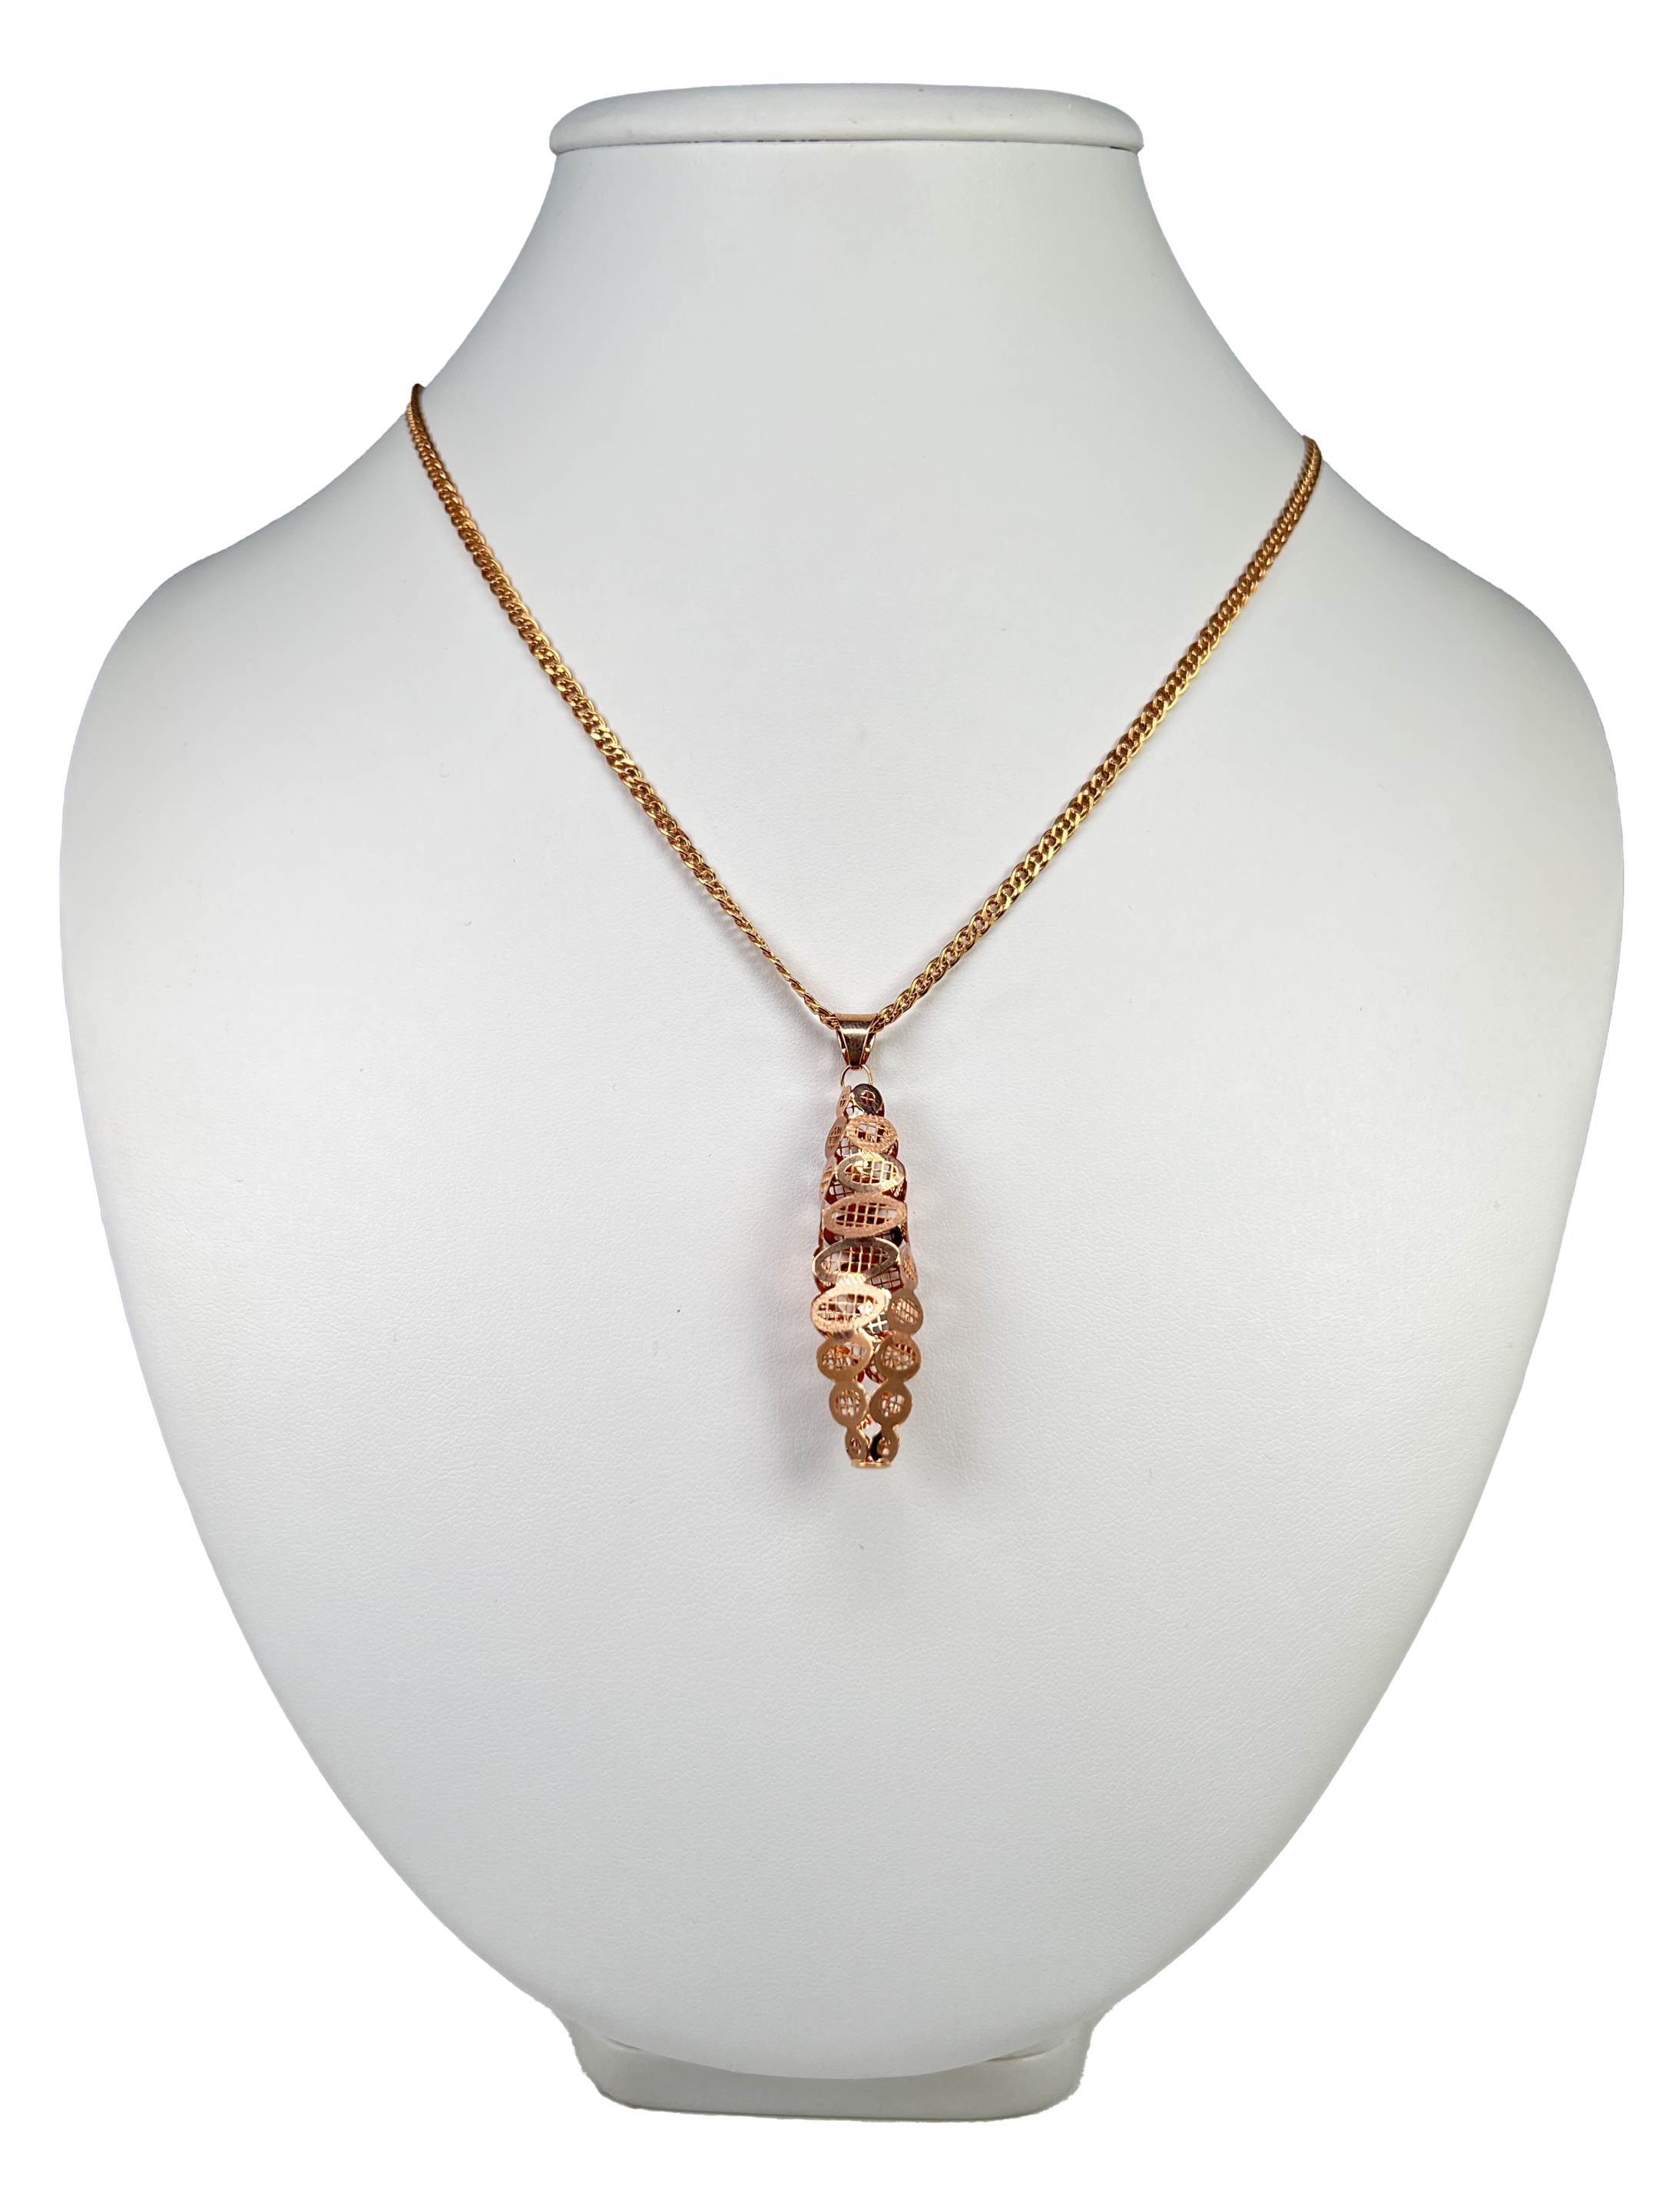 Gold pendant made of rose gold